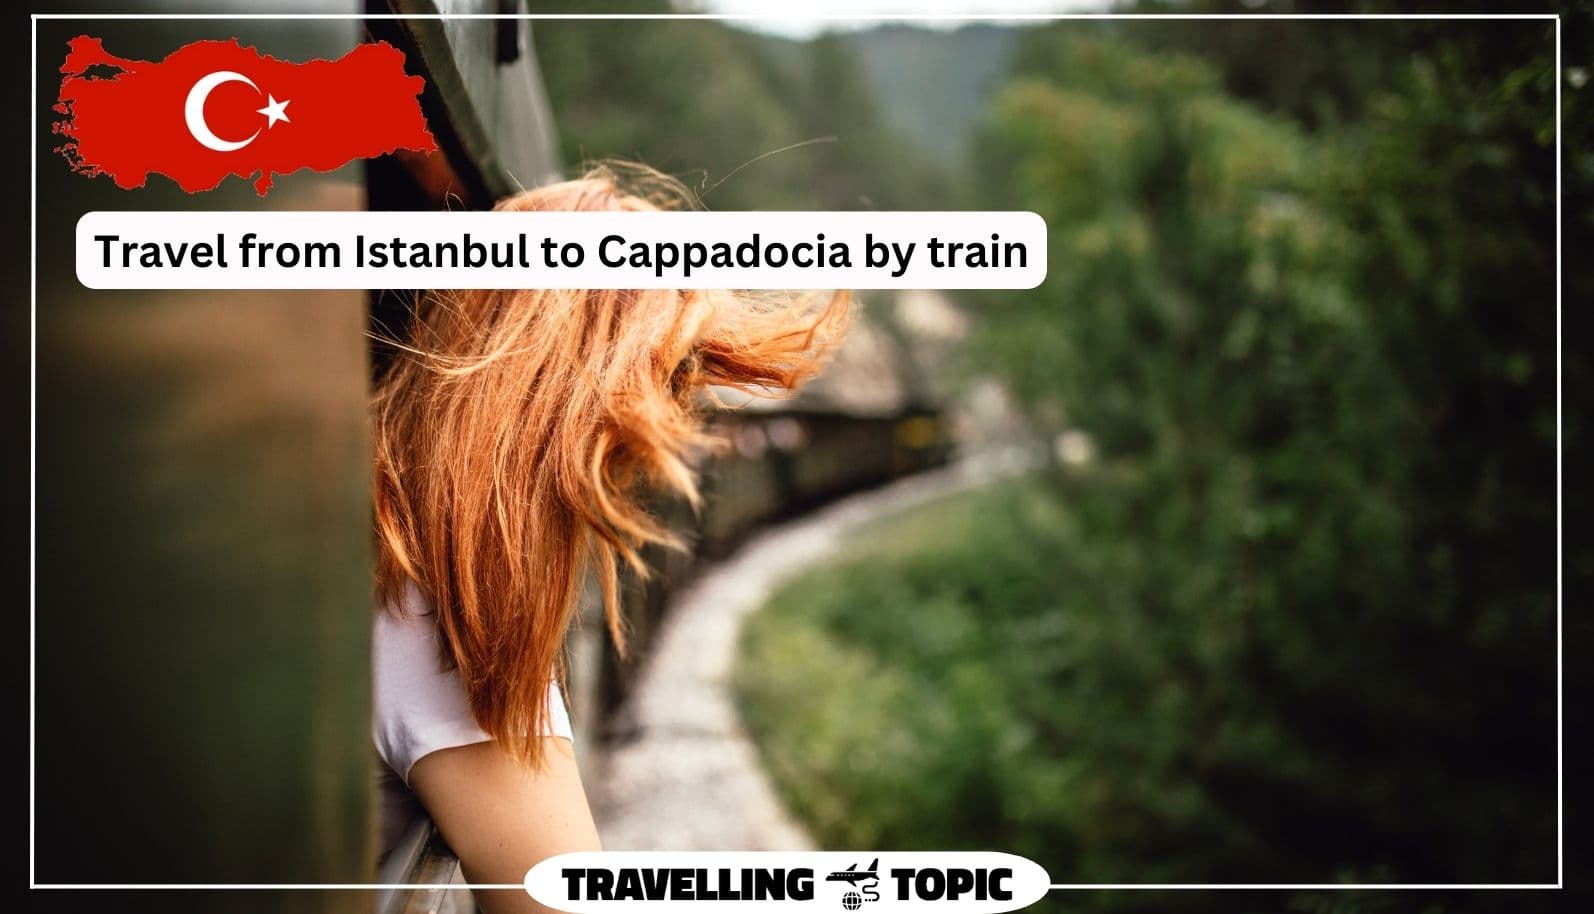 Travel from Istanbul to Cappadocia by train